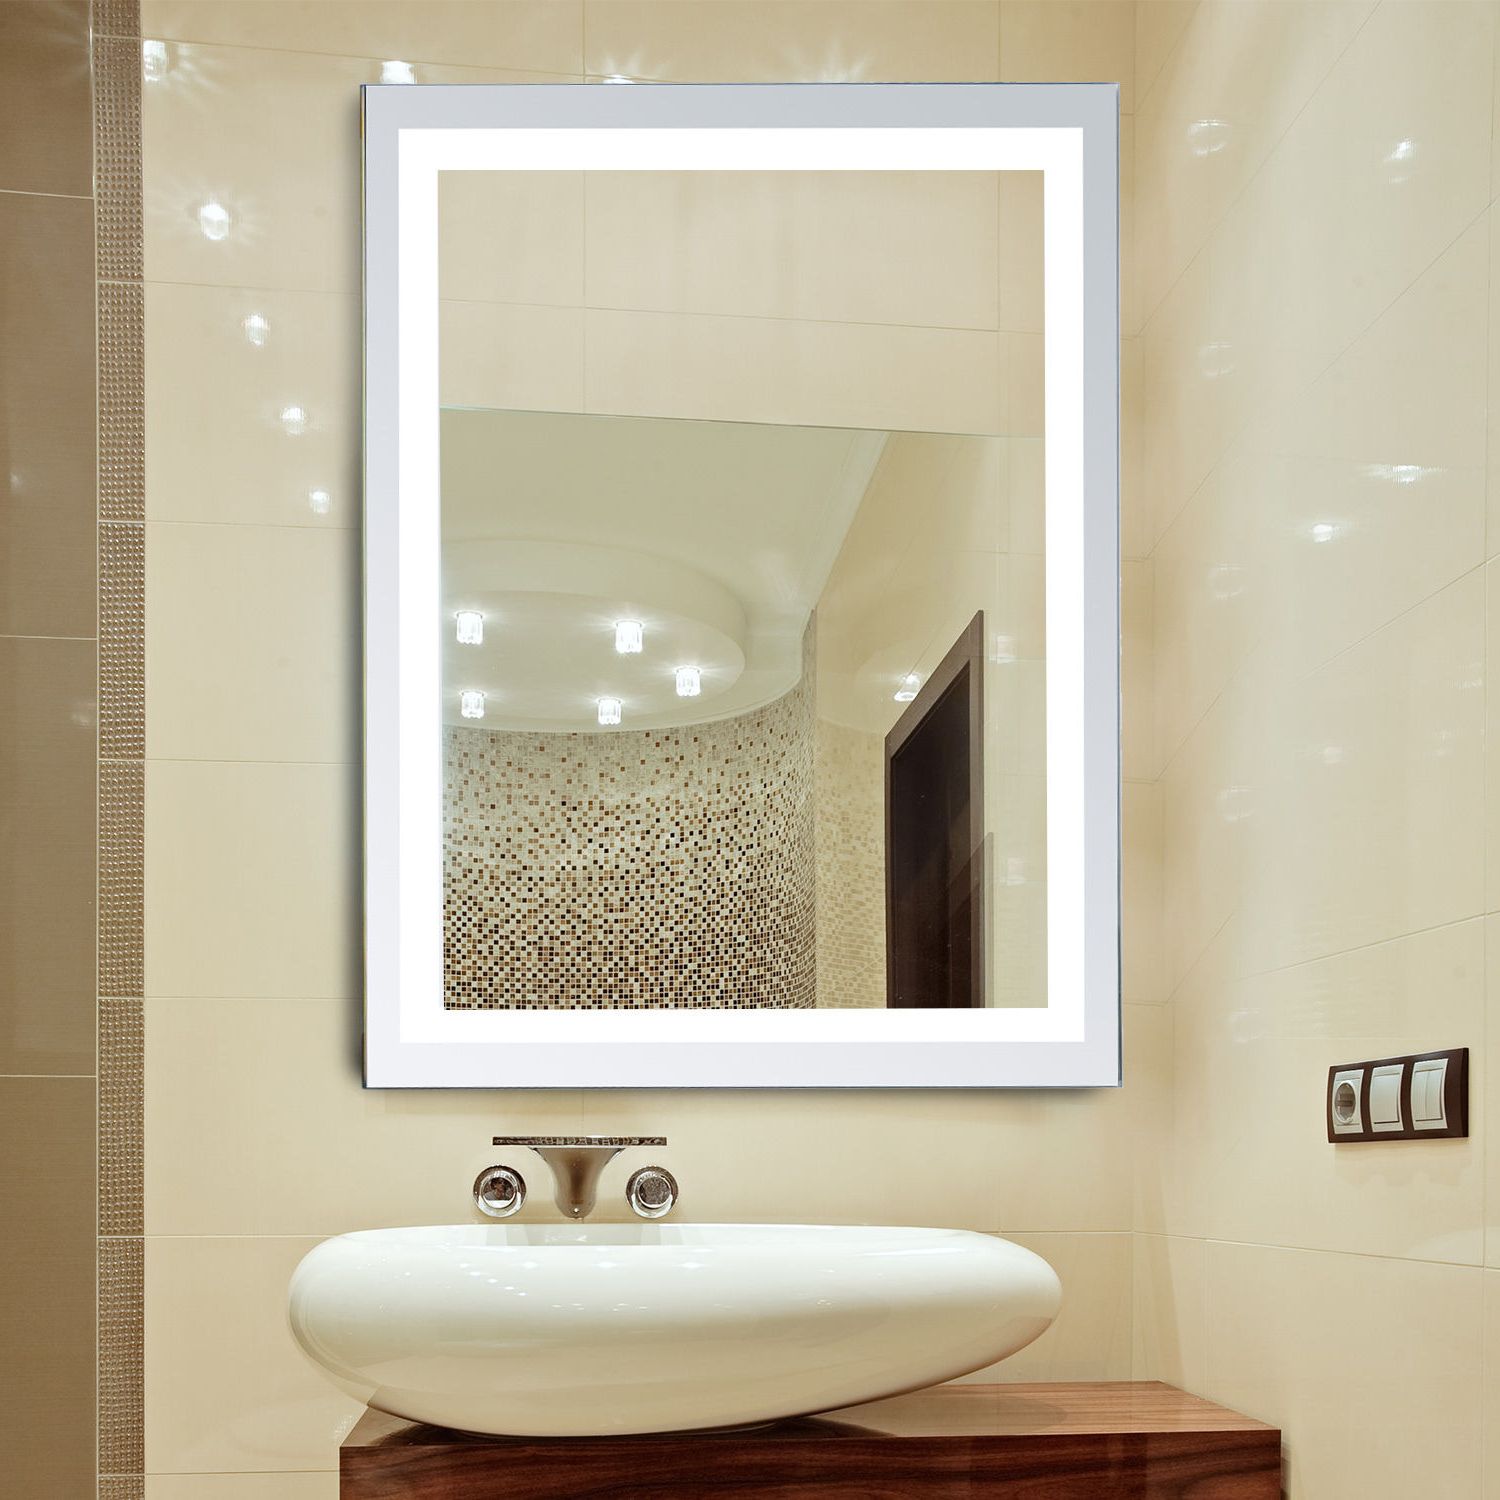 Bathroom Wall Mirrors Pertaining To Best And Newest Details About Led Illuminated Bathroom Wall Mirrors With Lights Modern  Makeup Vanity Mirror (View 1 of 20)